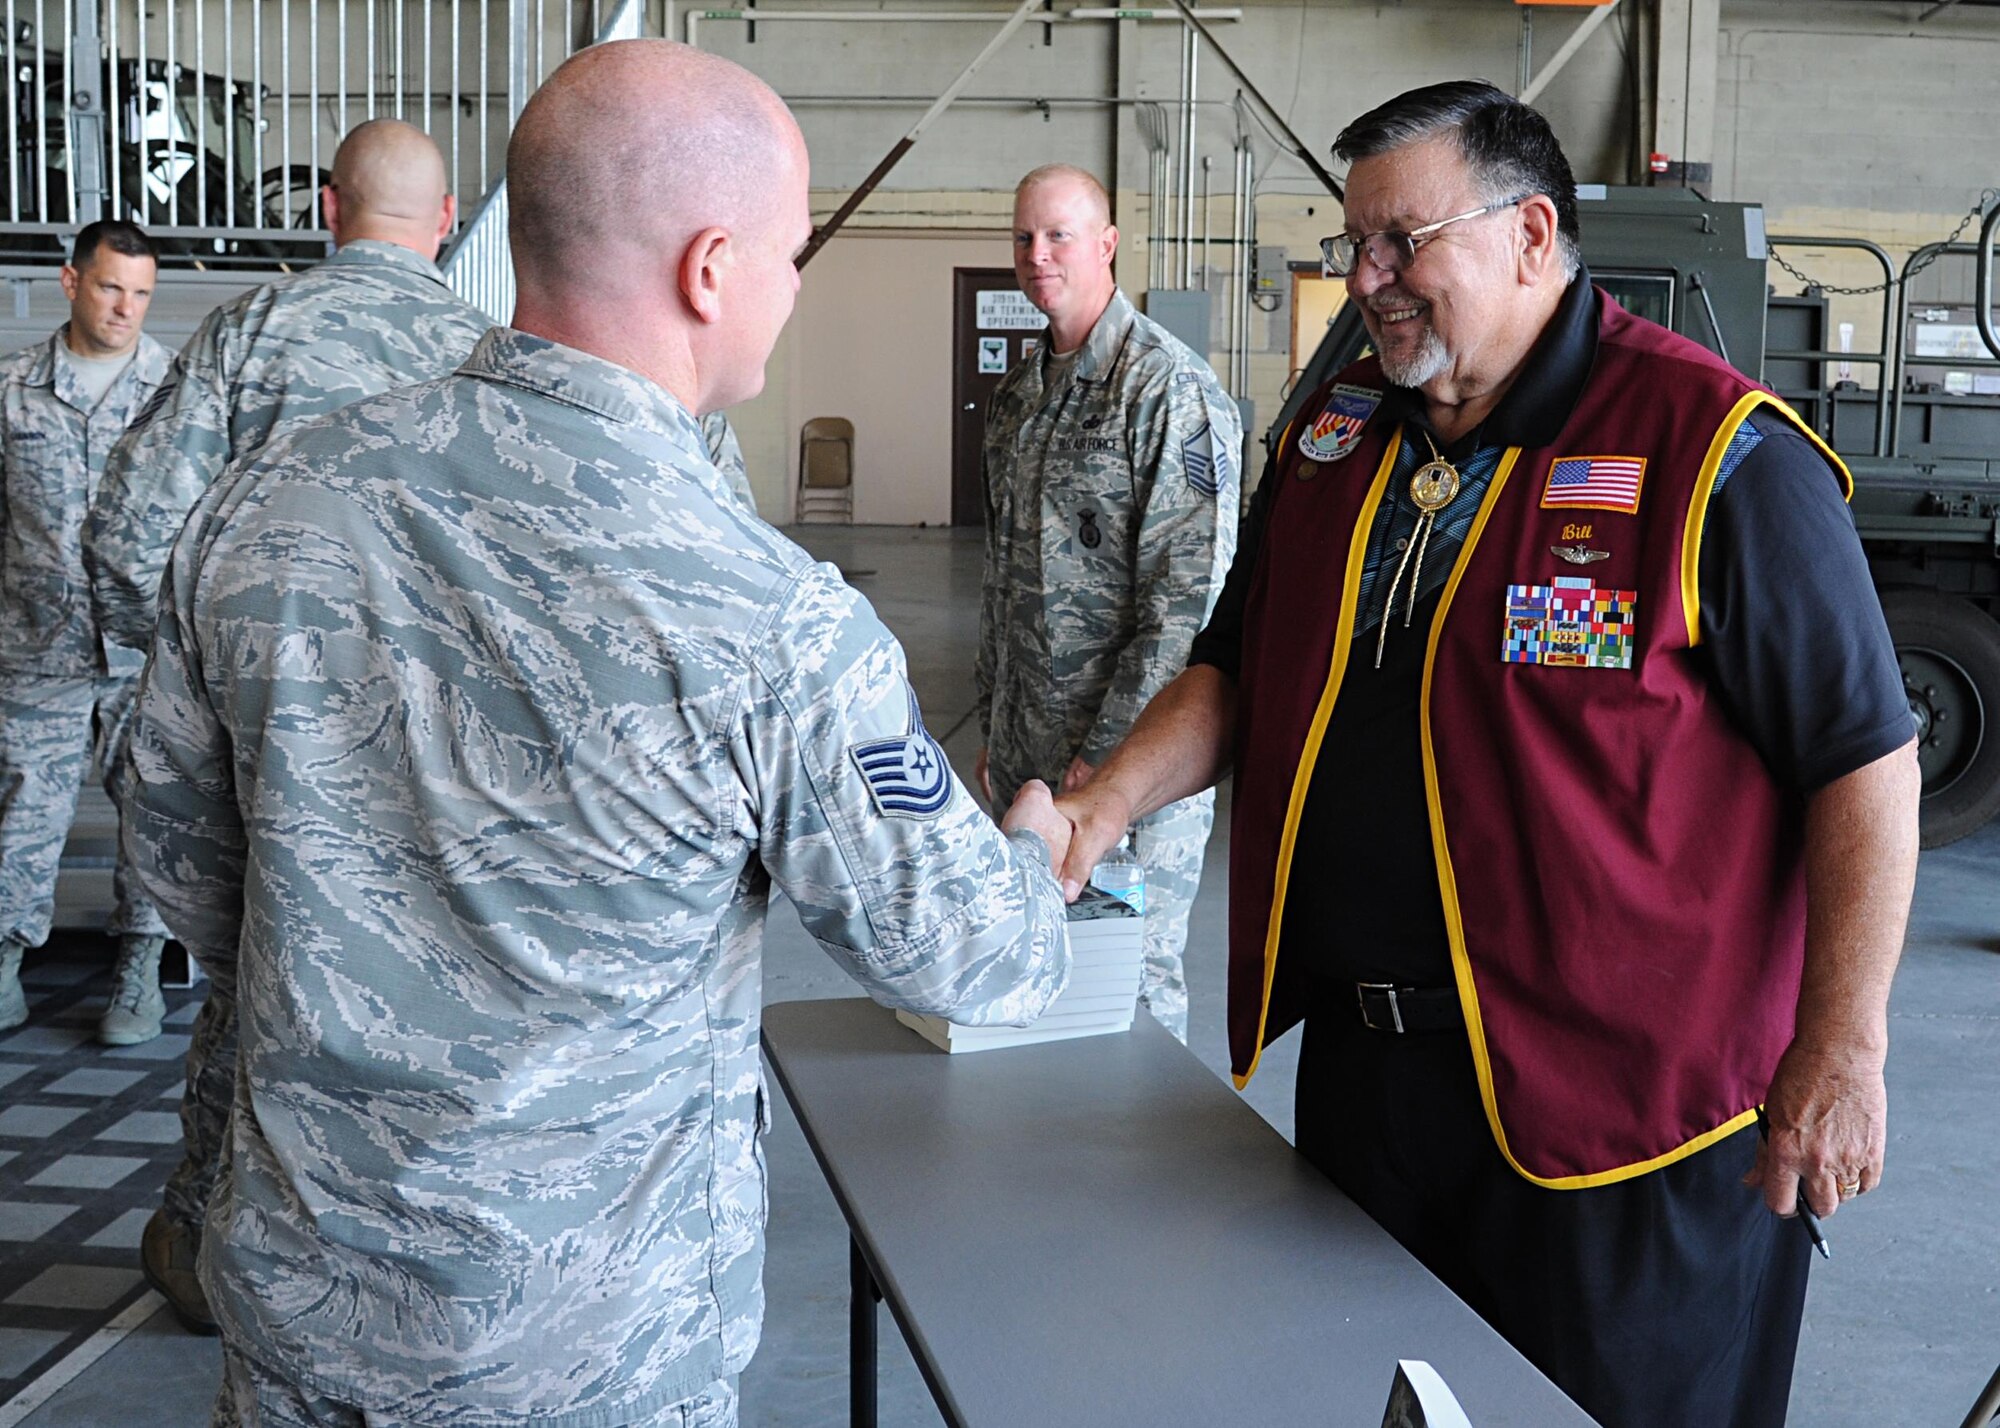 Tech. Sgt. Daniel Cary, 319th Contracting Flight contracting officer, shakes hands with Capt. William “Bill” Robinson, United States Air Force retired, August 18, 2016, on Grand Forks Air Force Base, N.D. Robinson signed copies of his book after speaking with Airmen about his time spent as a POW. (U.S. Air Force photo by Senior Airman Ryan Sparks/Released)